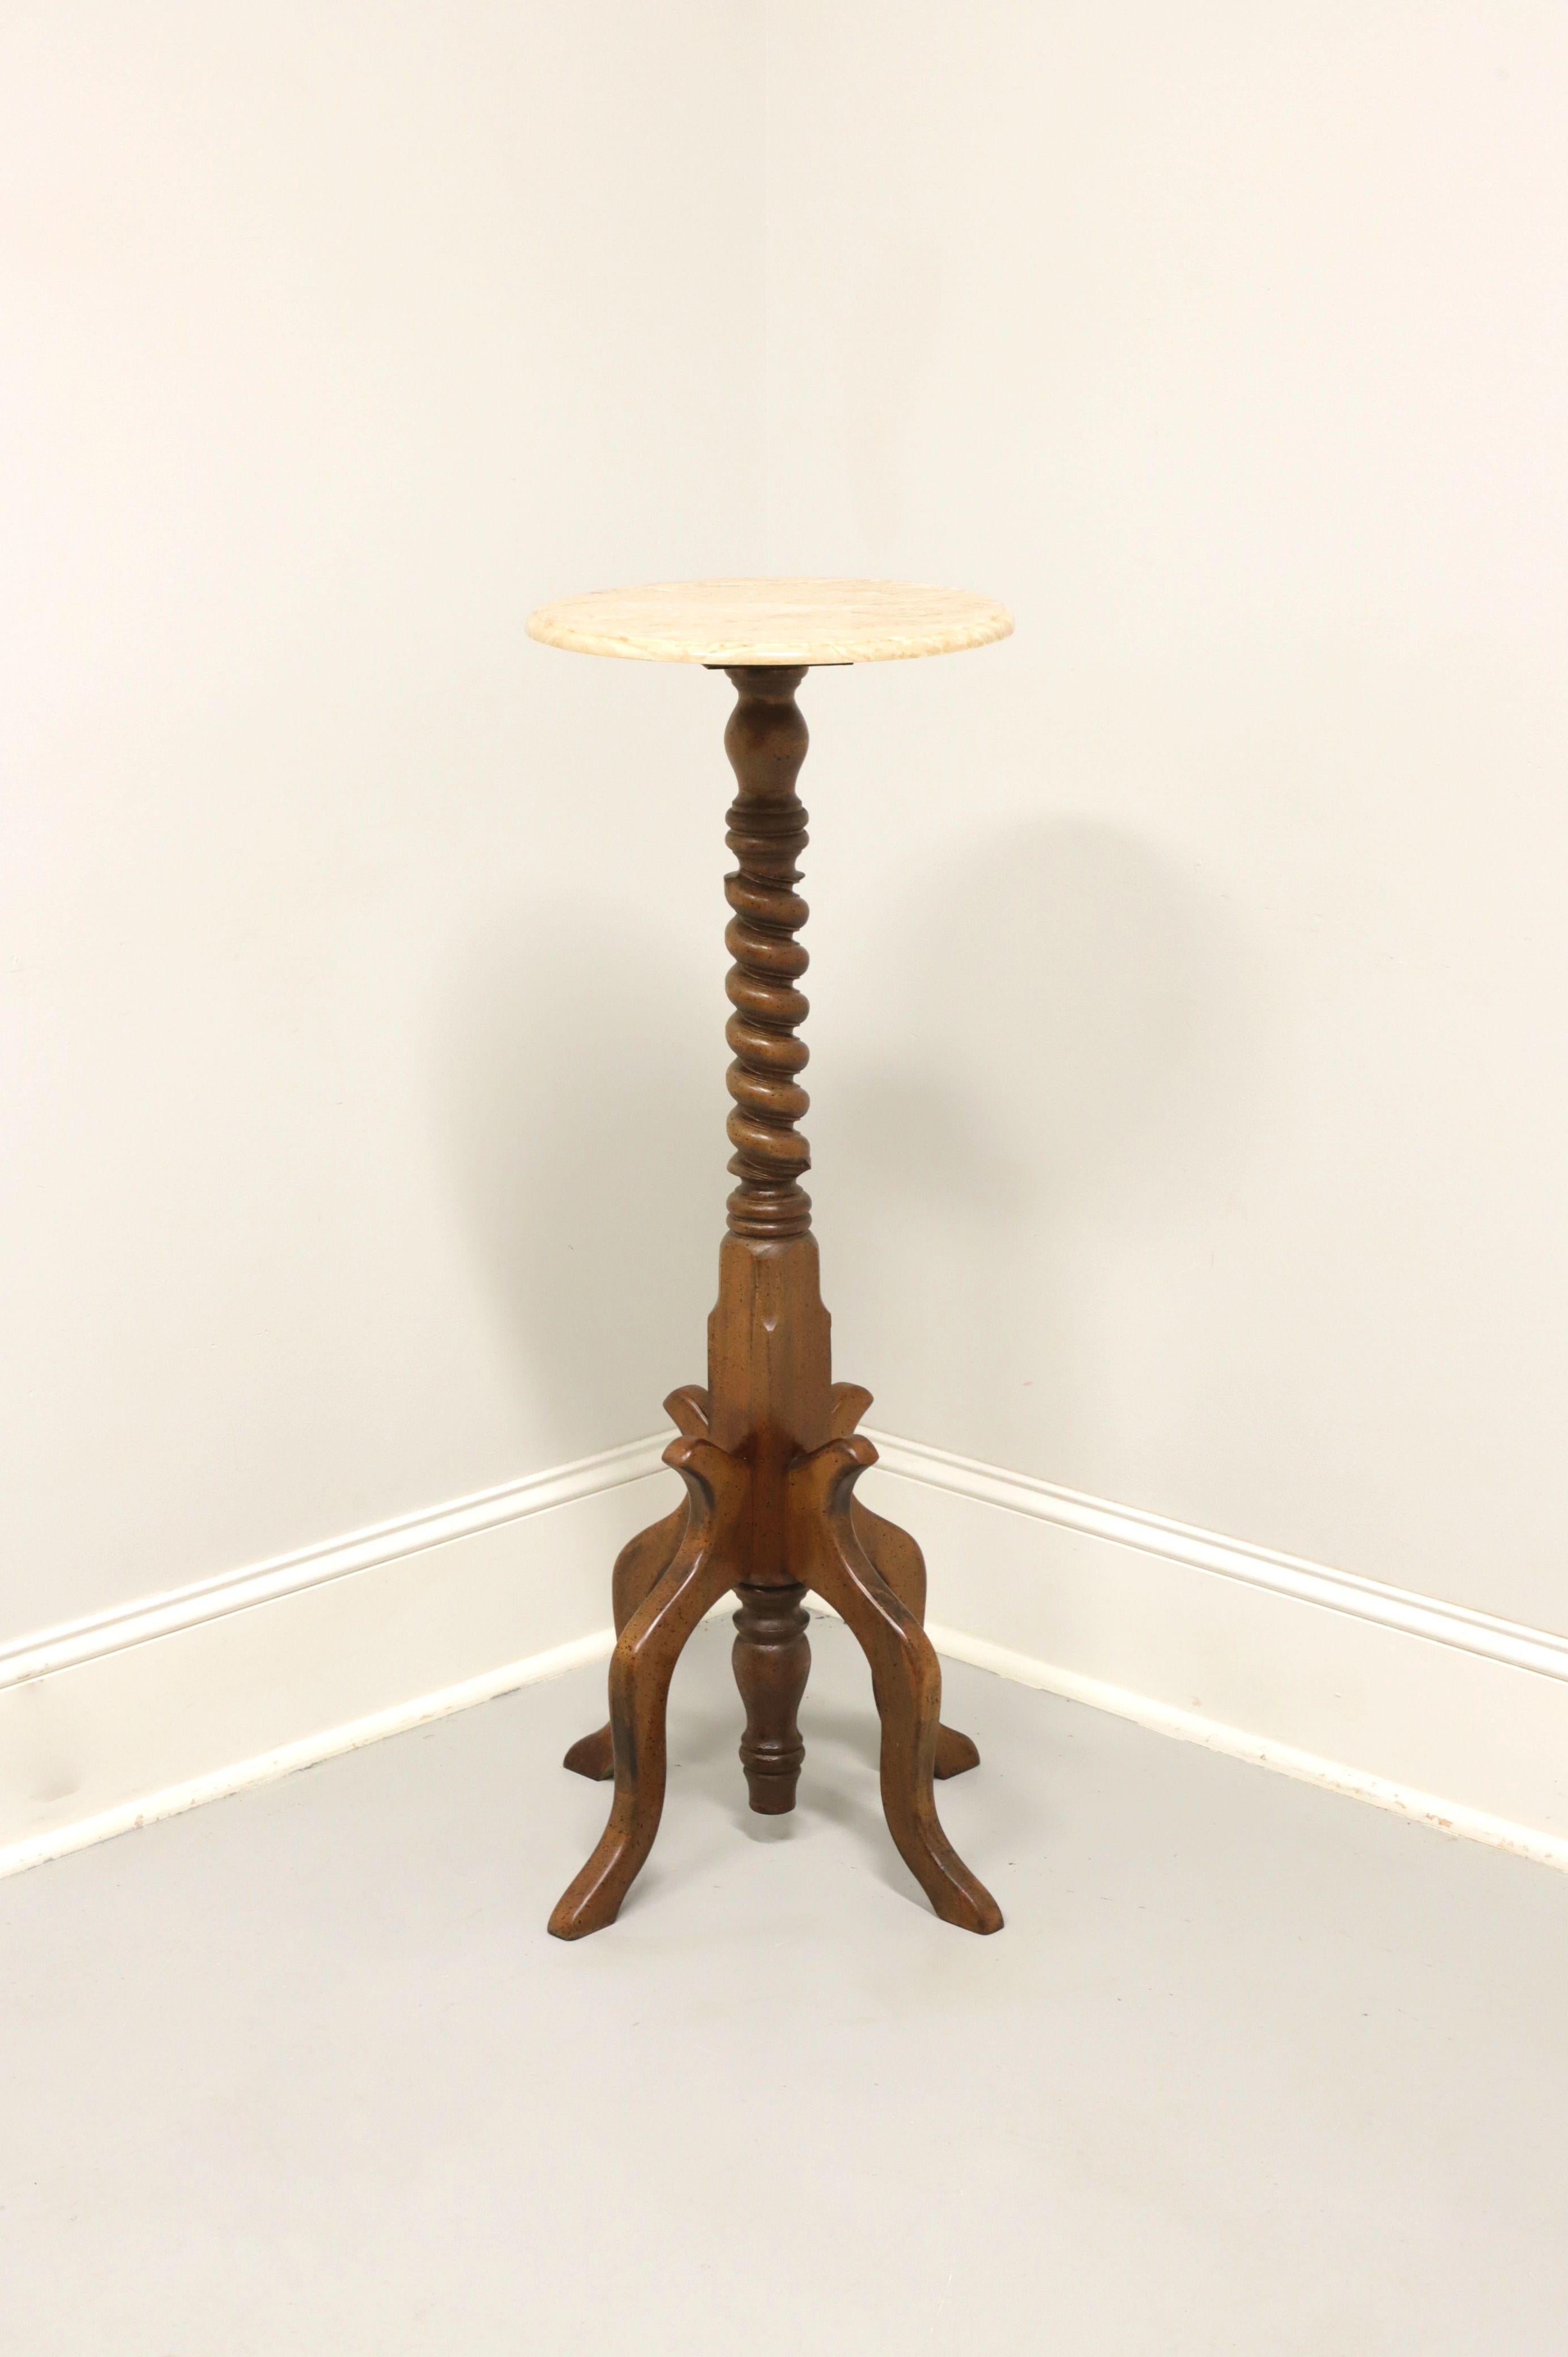 A Victorian style plant stand, unbranded. Solid walnut with distressed finish to give appearance of age, round cultured marble bevel edge top, tall barley twist pedestal base, decorative reverse finial at bottom, and four curved legs. Cultured